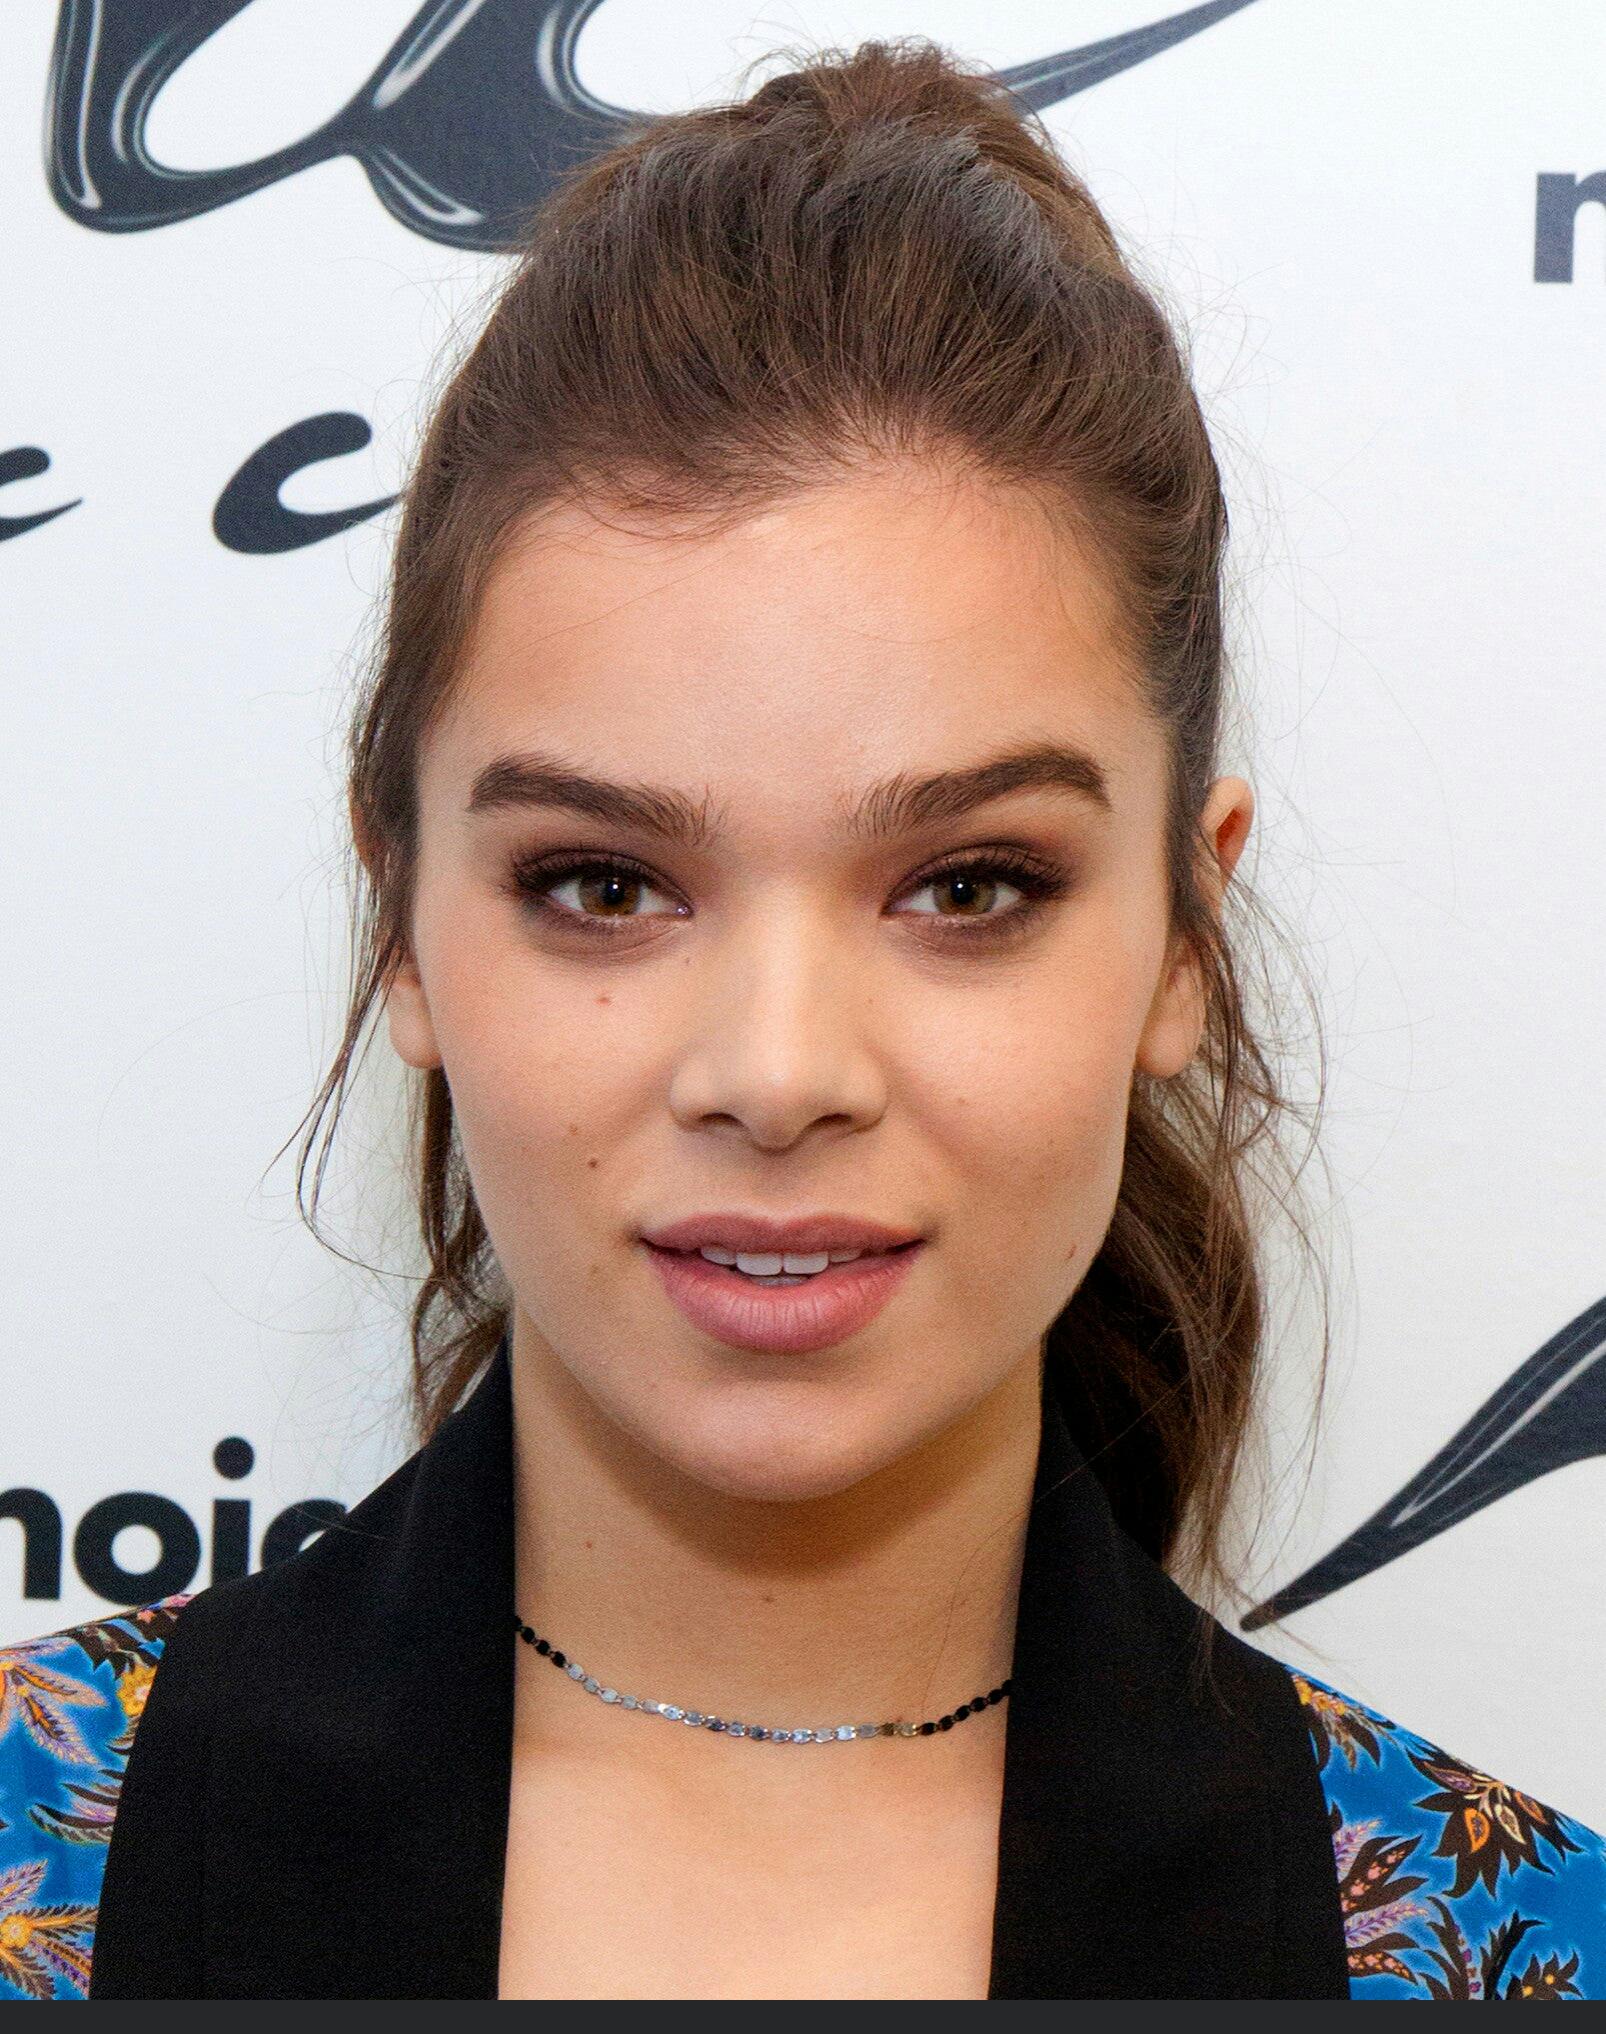 Would Love See Hailee Steinfeld In Blow Bang With Bbc And See Her Beautiful Face With Jizz